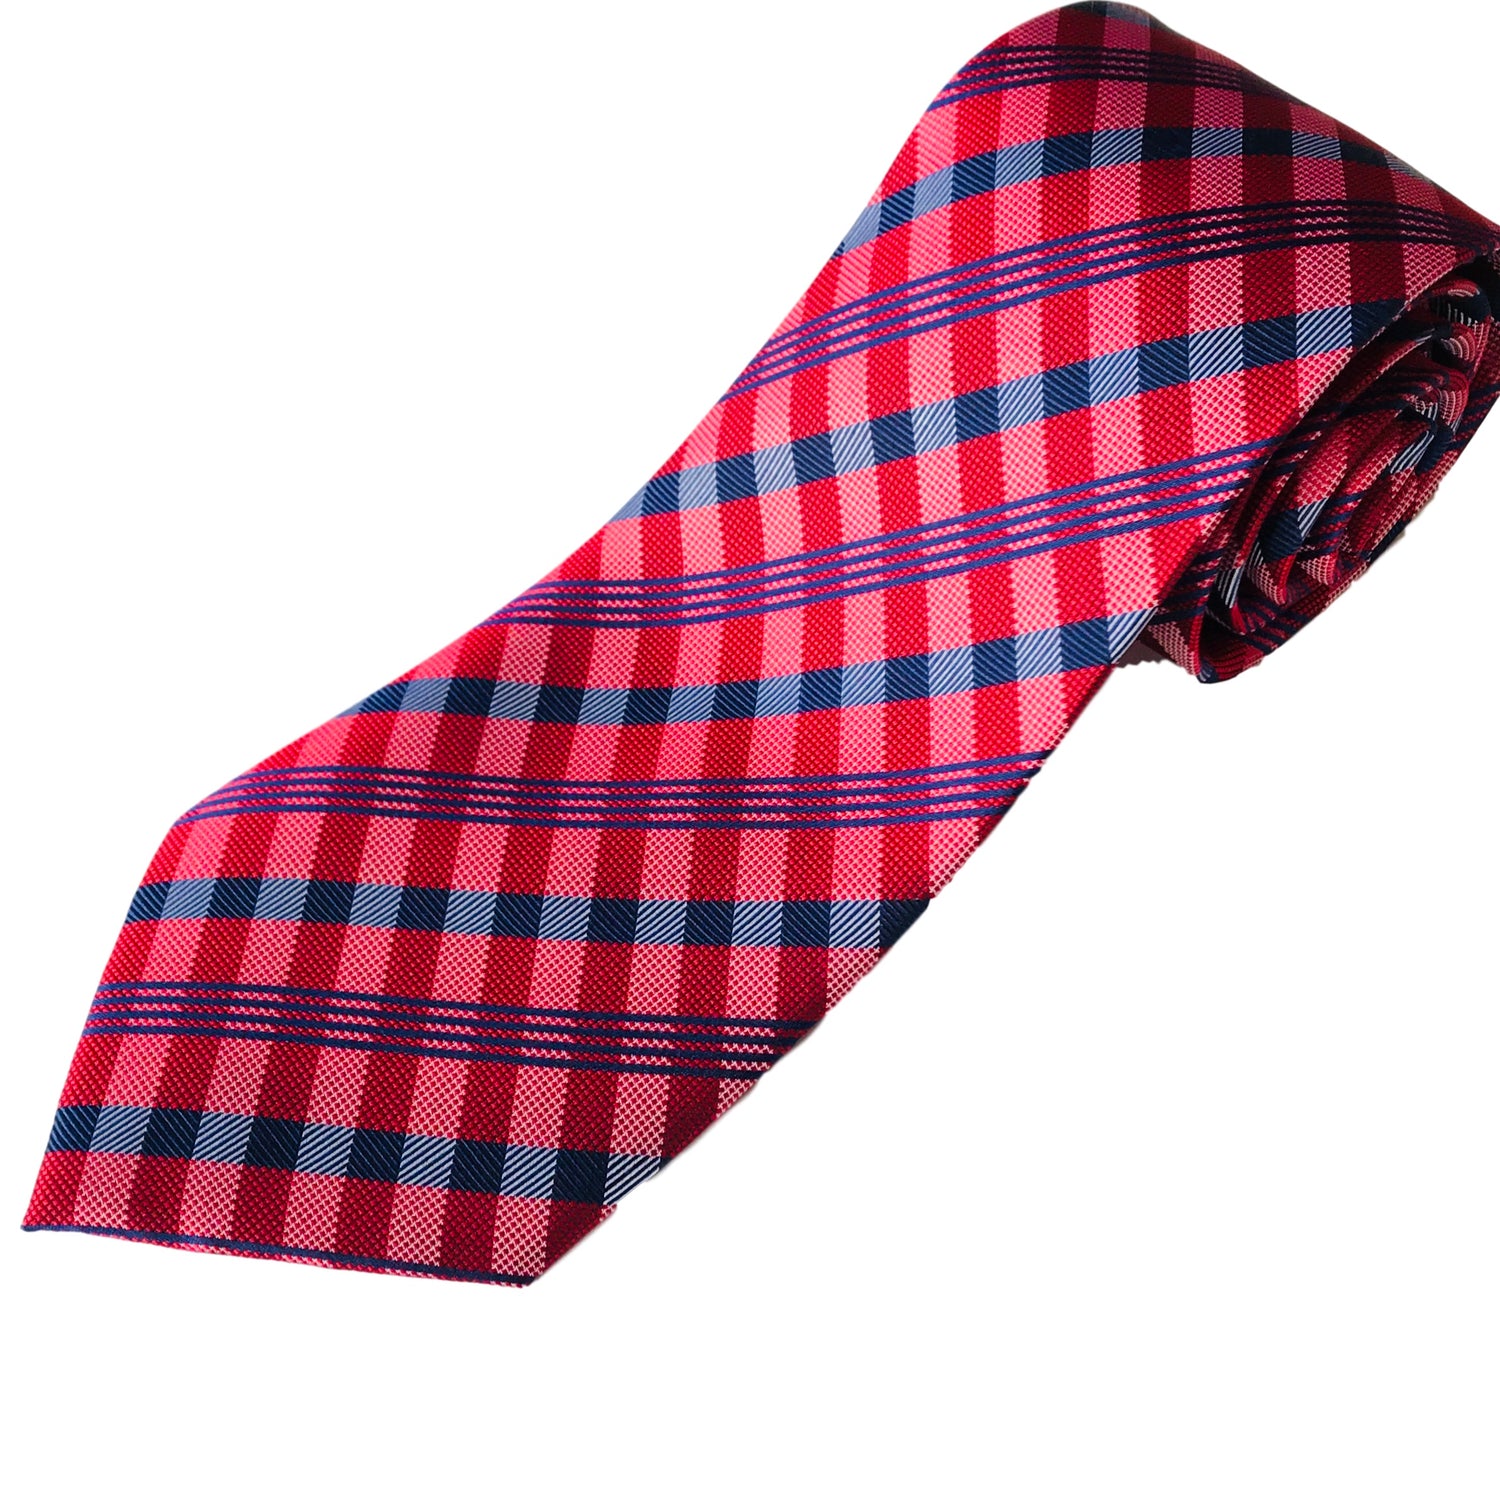 100% Silk Extra Long Plaid Tie for Big and Tall Men